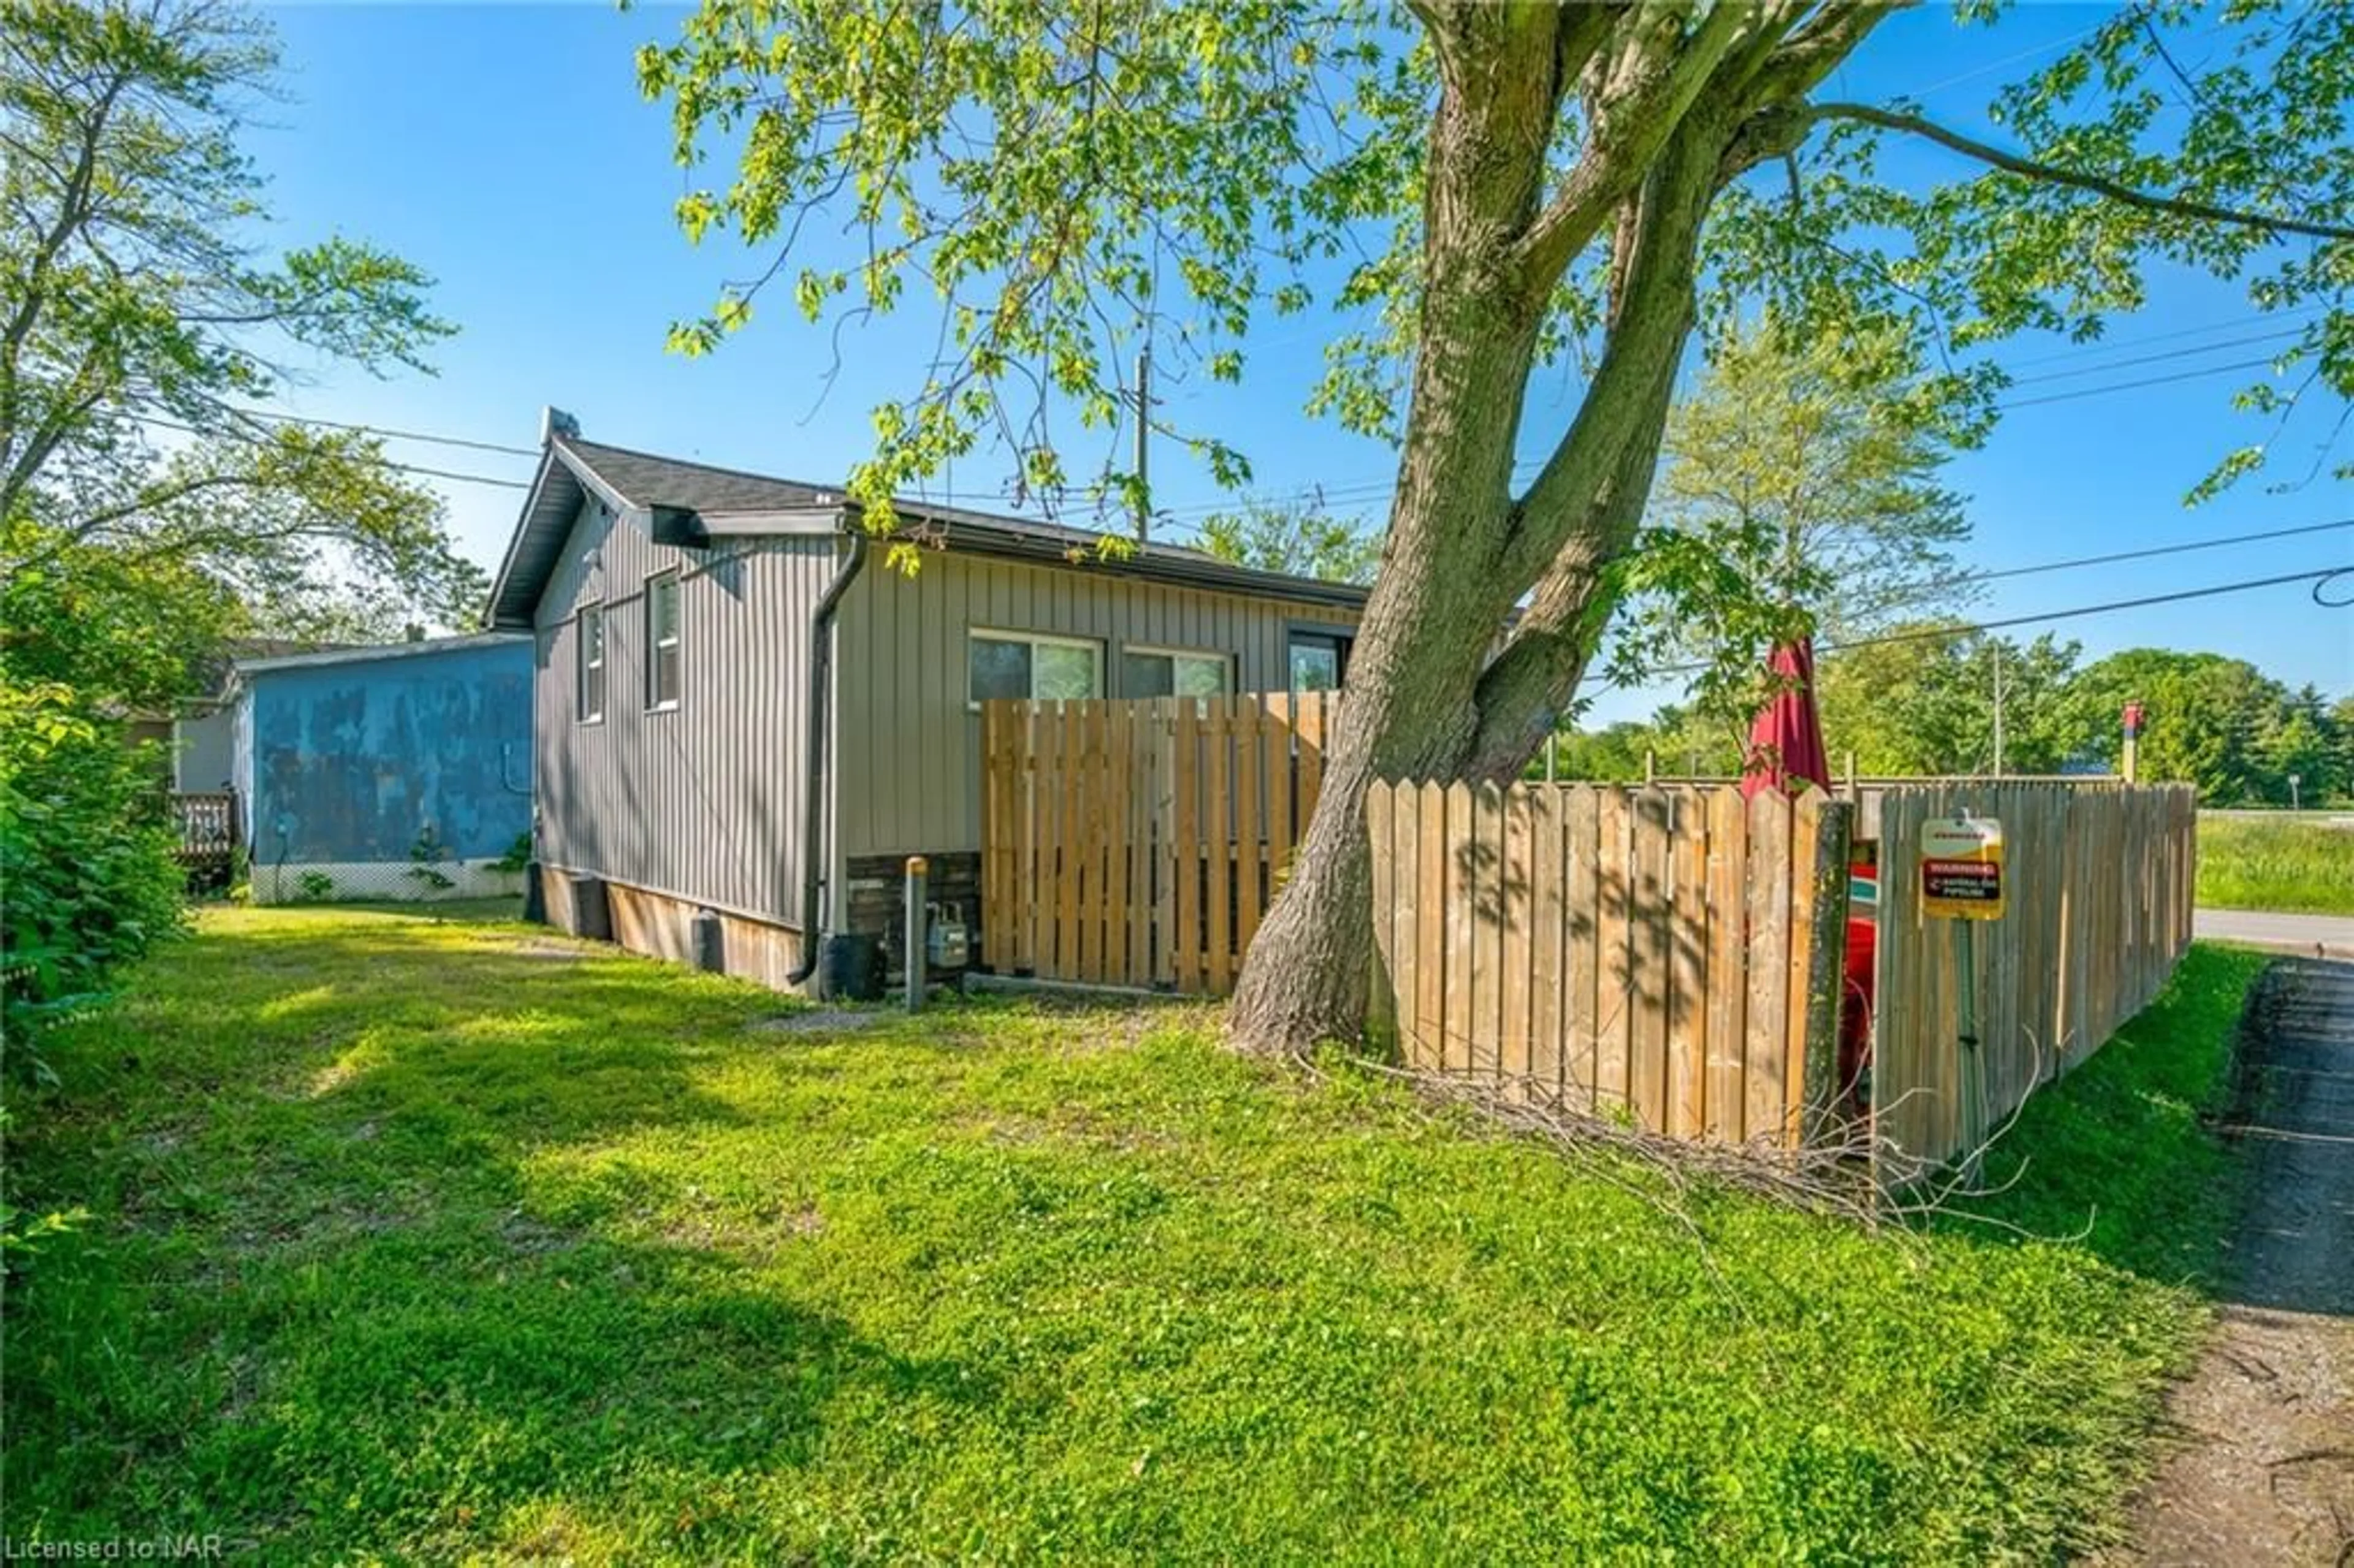 Fenced yard for 12209 Lakeshore Rd Rd, Wainfleet Ontario L0S 1V0